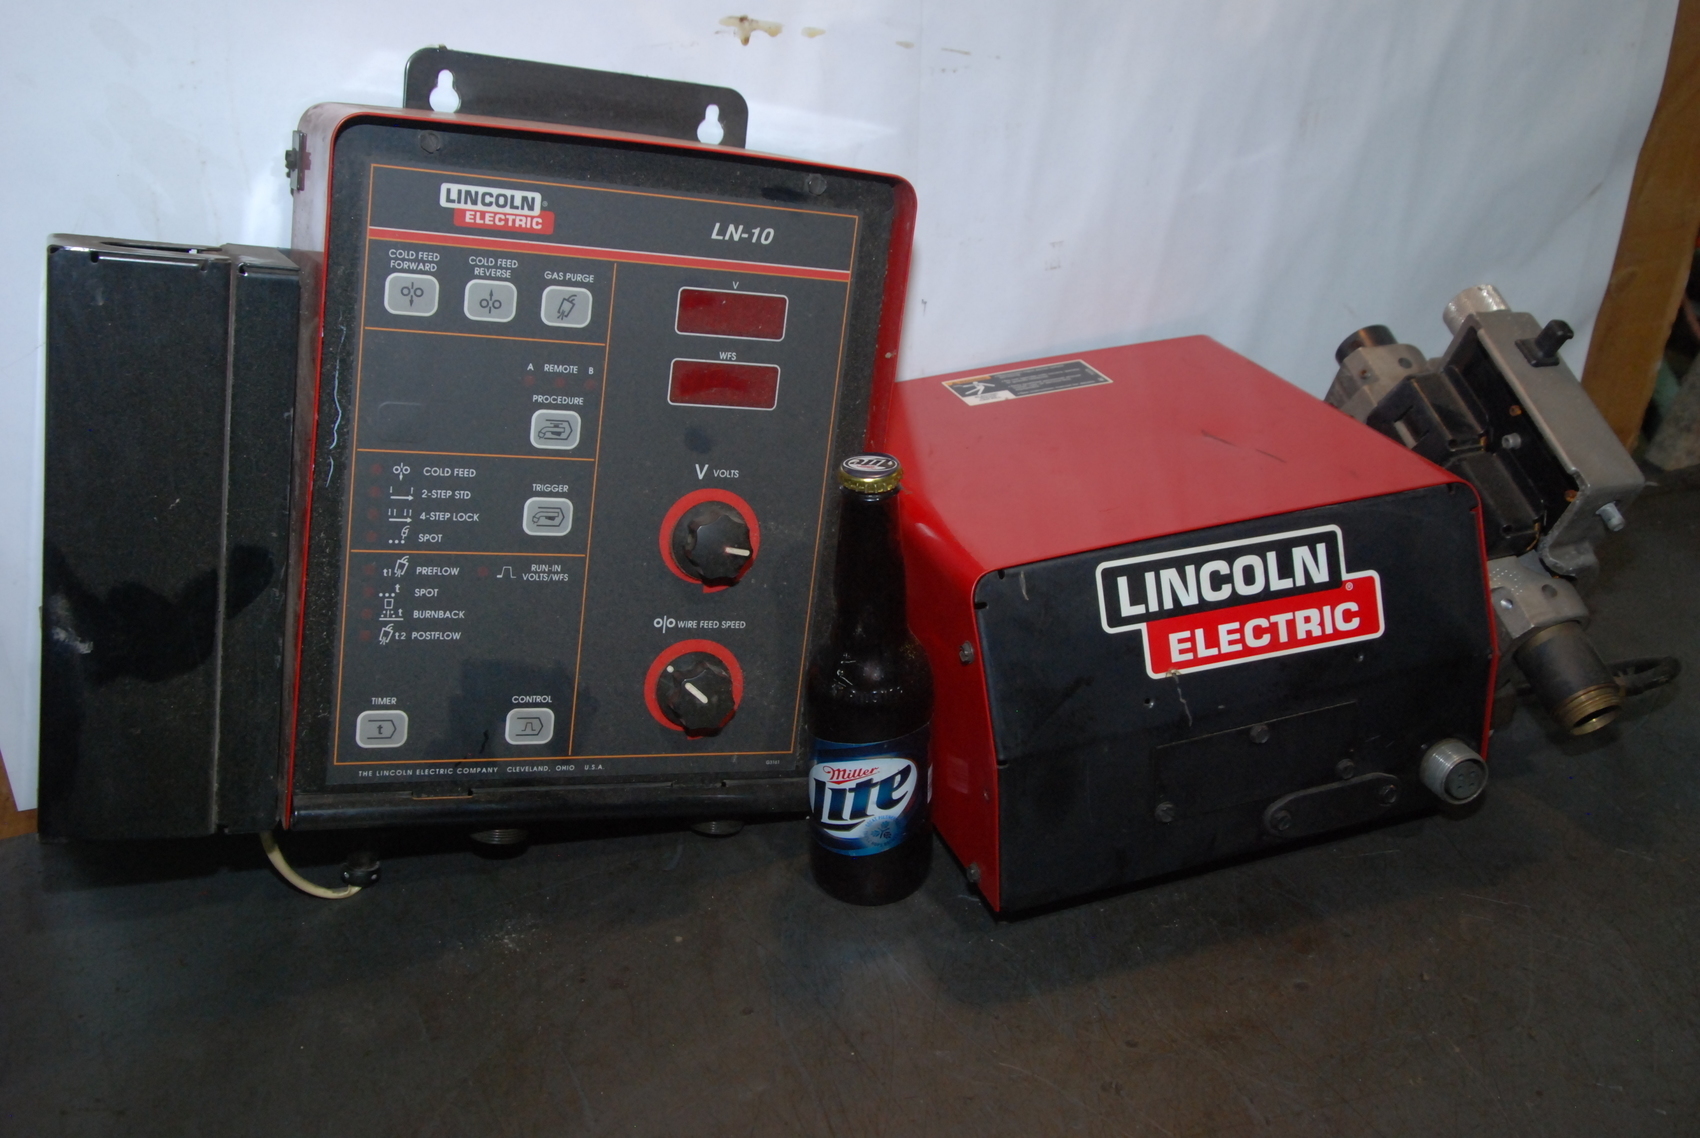 Lincoln Electric LN-10 Controller and MIG Power Feed units